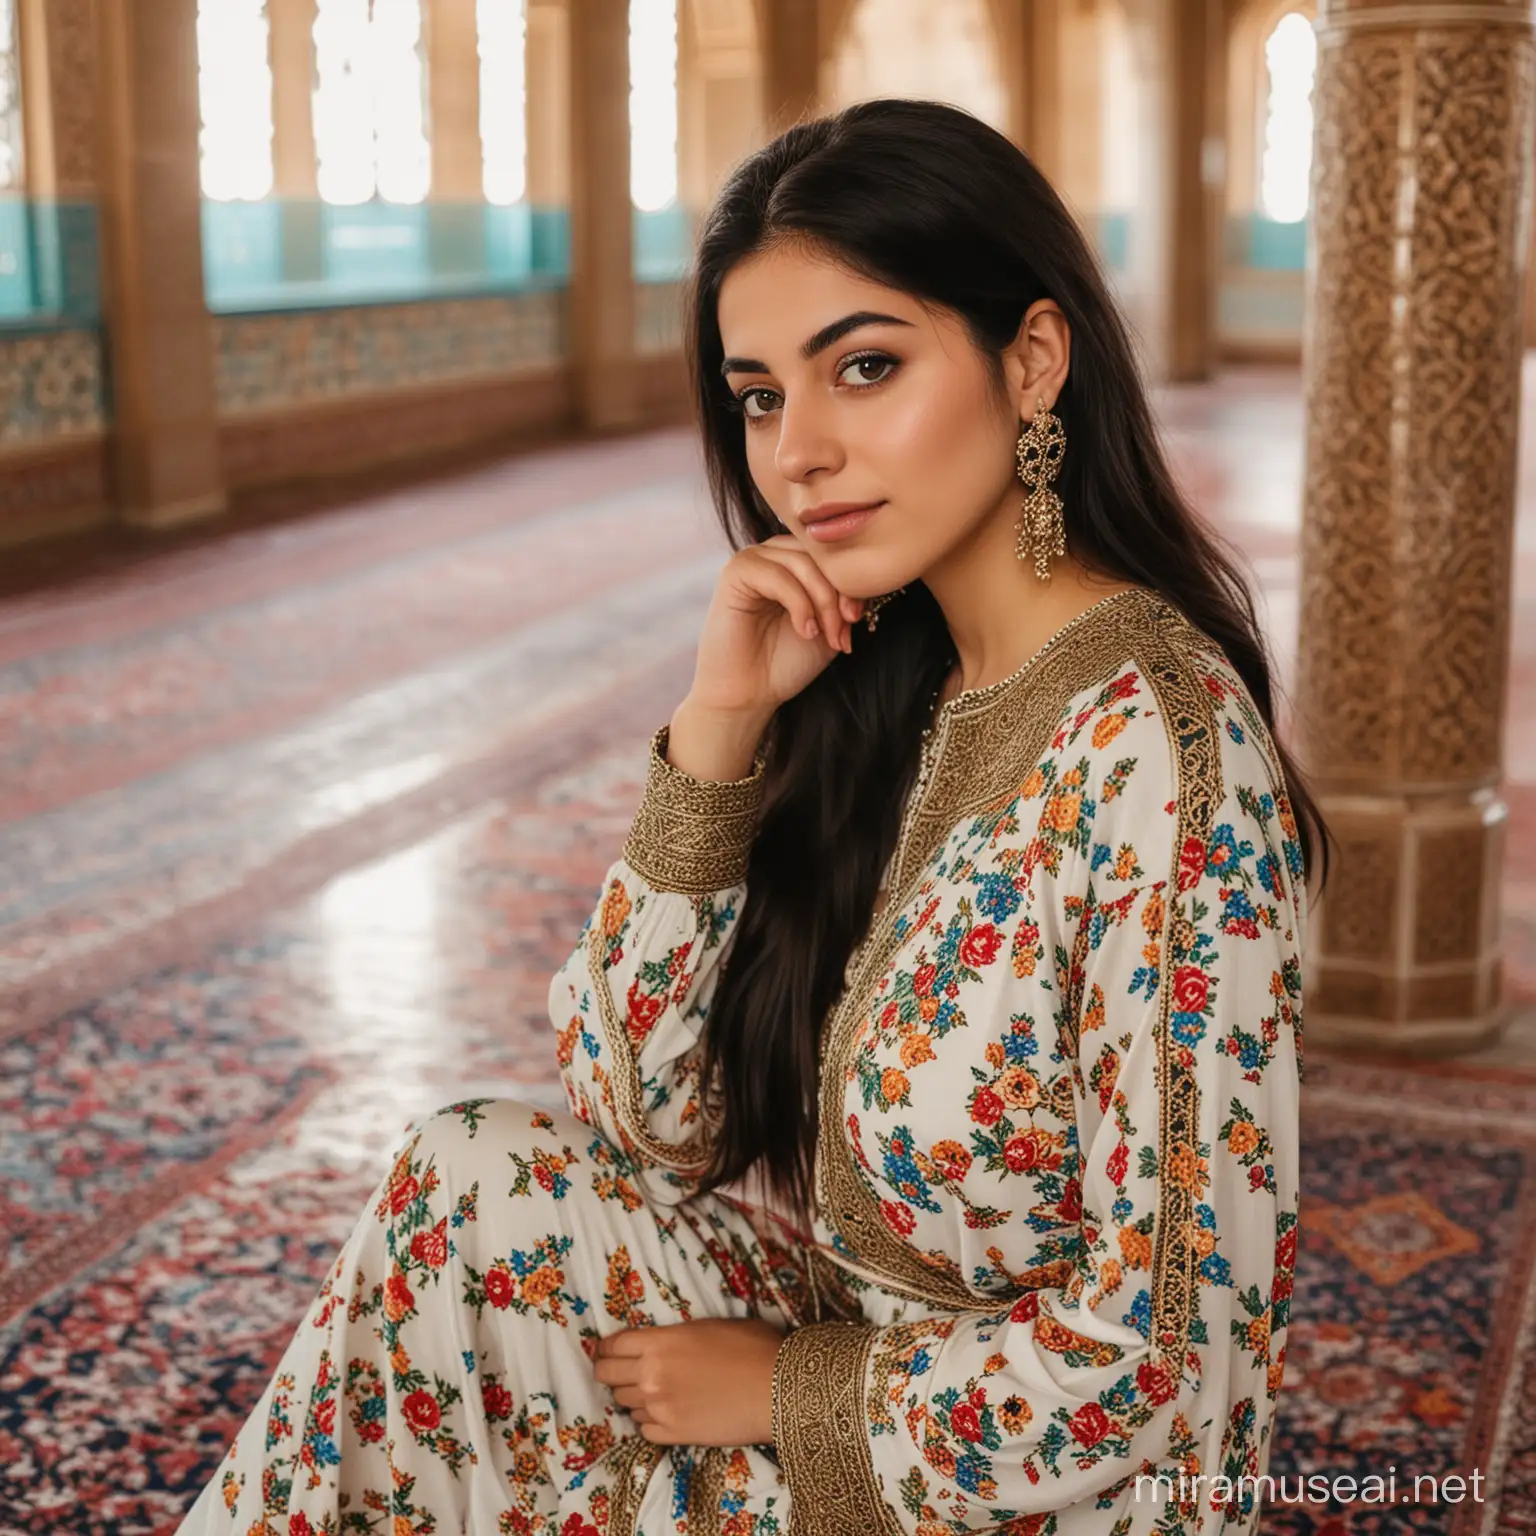 Persian Girl in Traditional Dress at Mosque